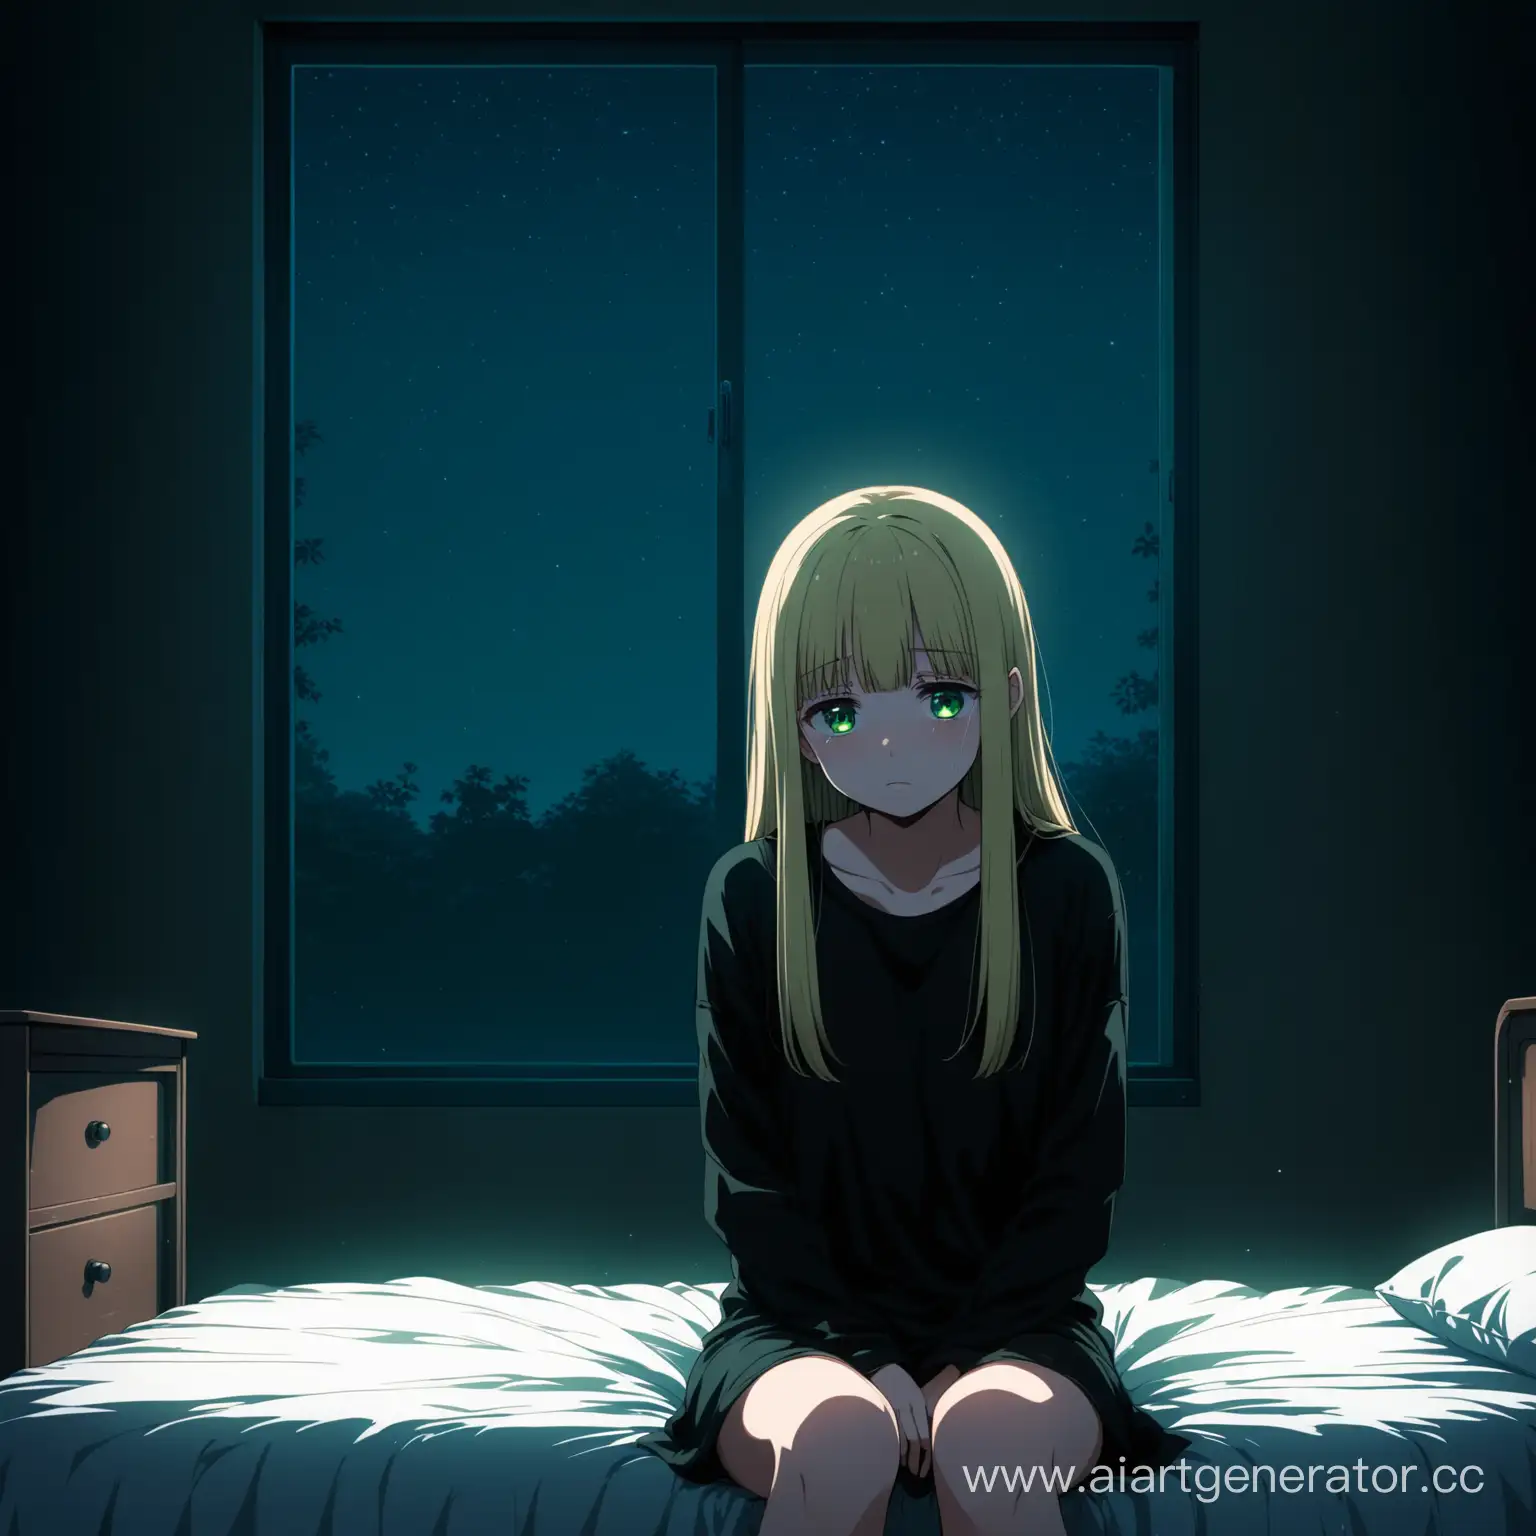 a short girl, long straight blonde hair with straight bangs, big green eyes, she is wearing a long black T-shirt, she is sitting in an empty room with only one bed and a window, she sobbing and looks sad, night atmosphere, anime style